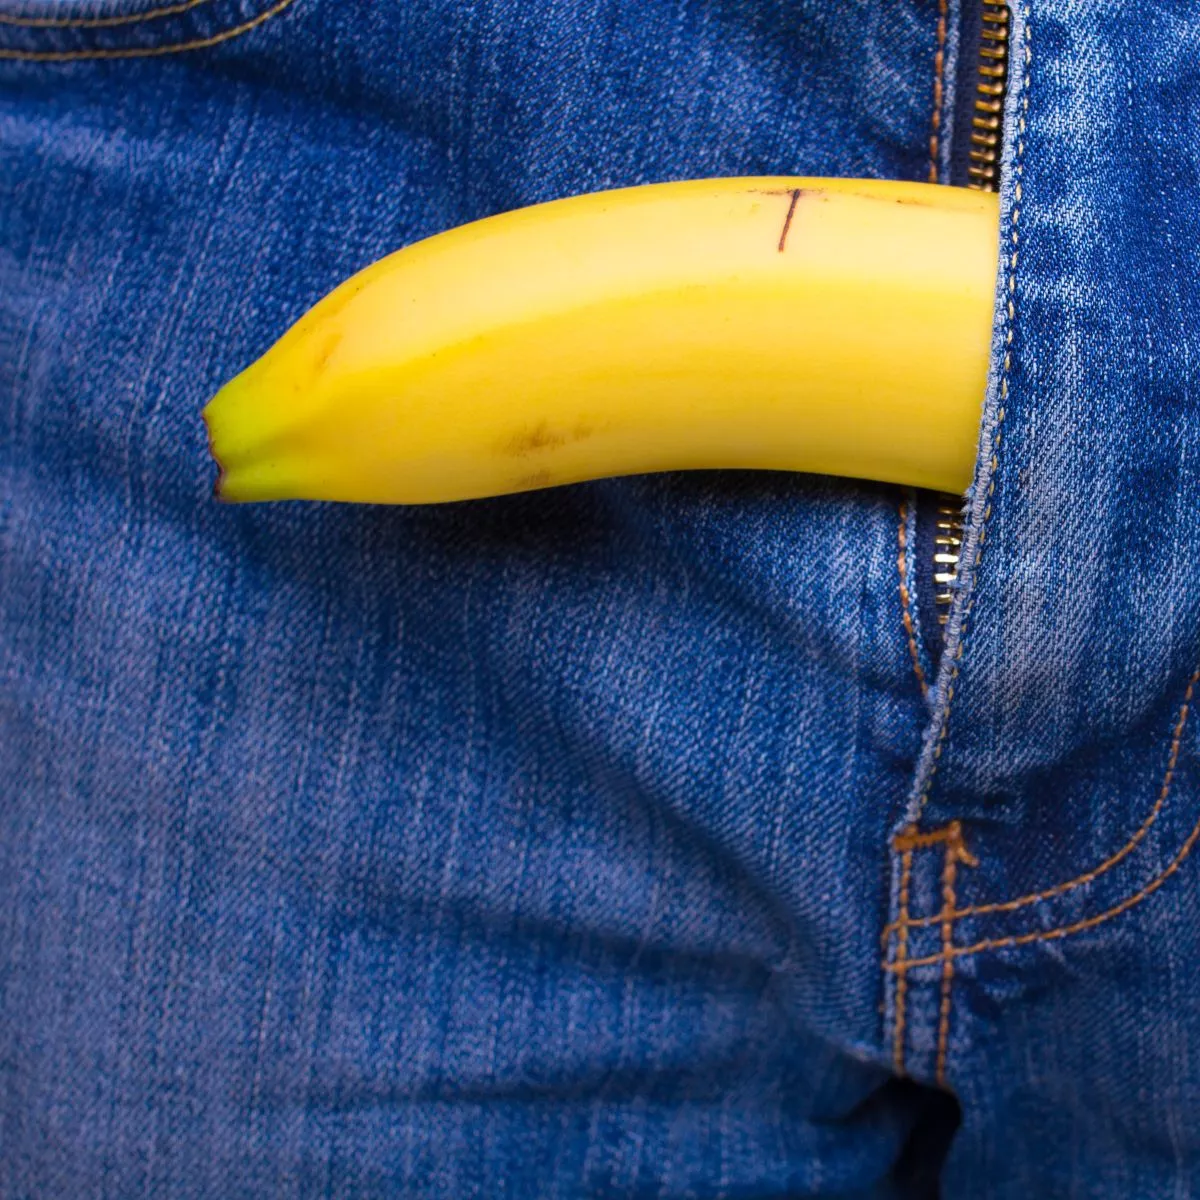 donna kidwell recommends masturbate with banana peel pic